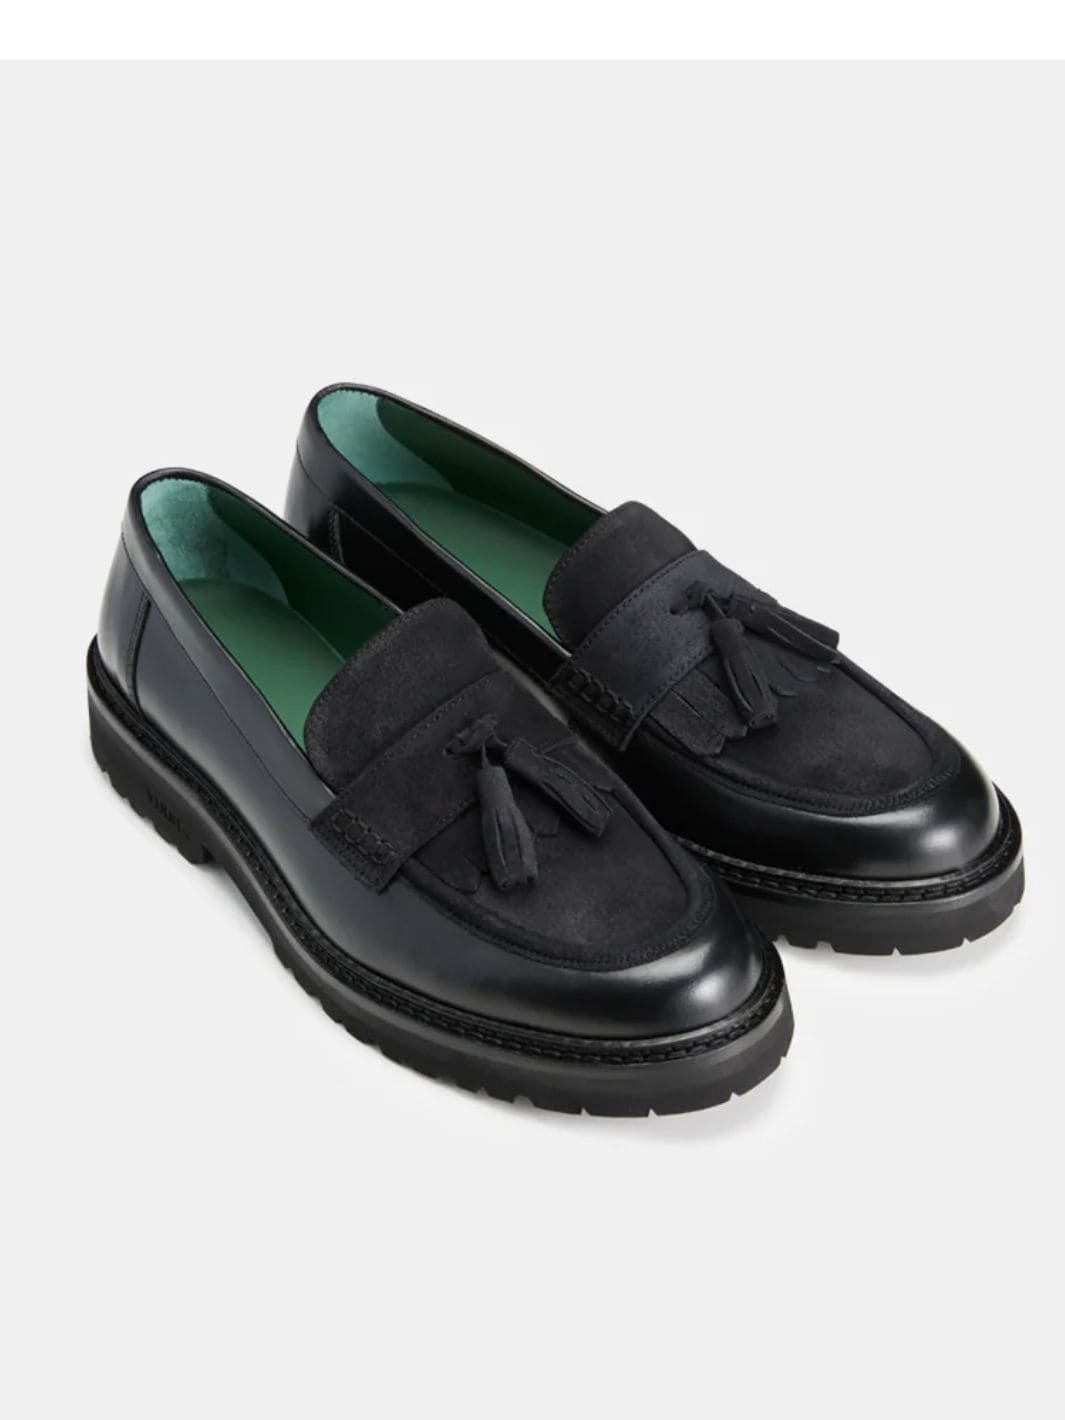 Vinny's Shoes Loafers | Richee Penny Loafers